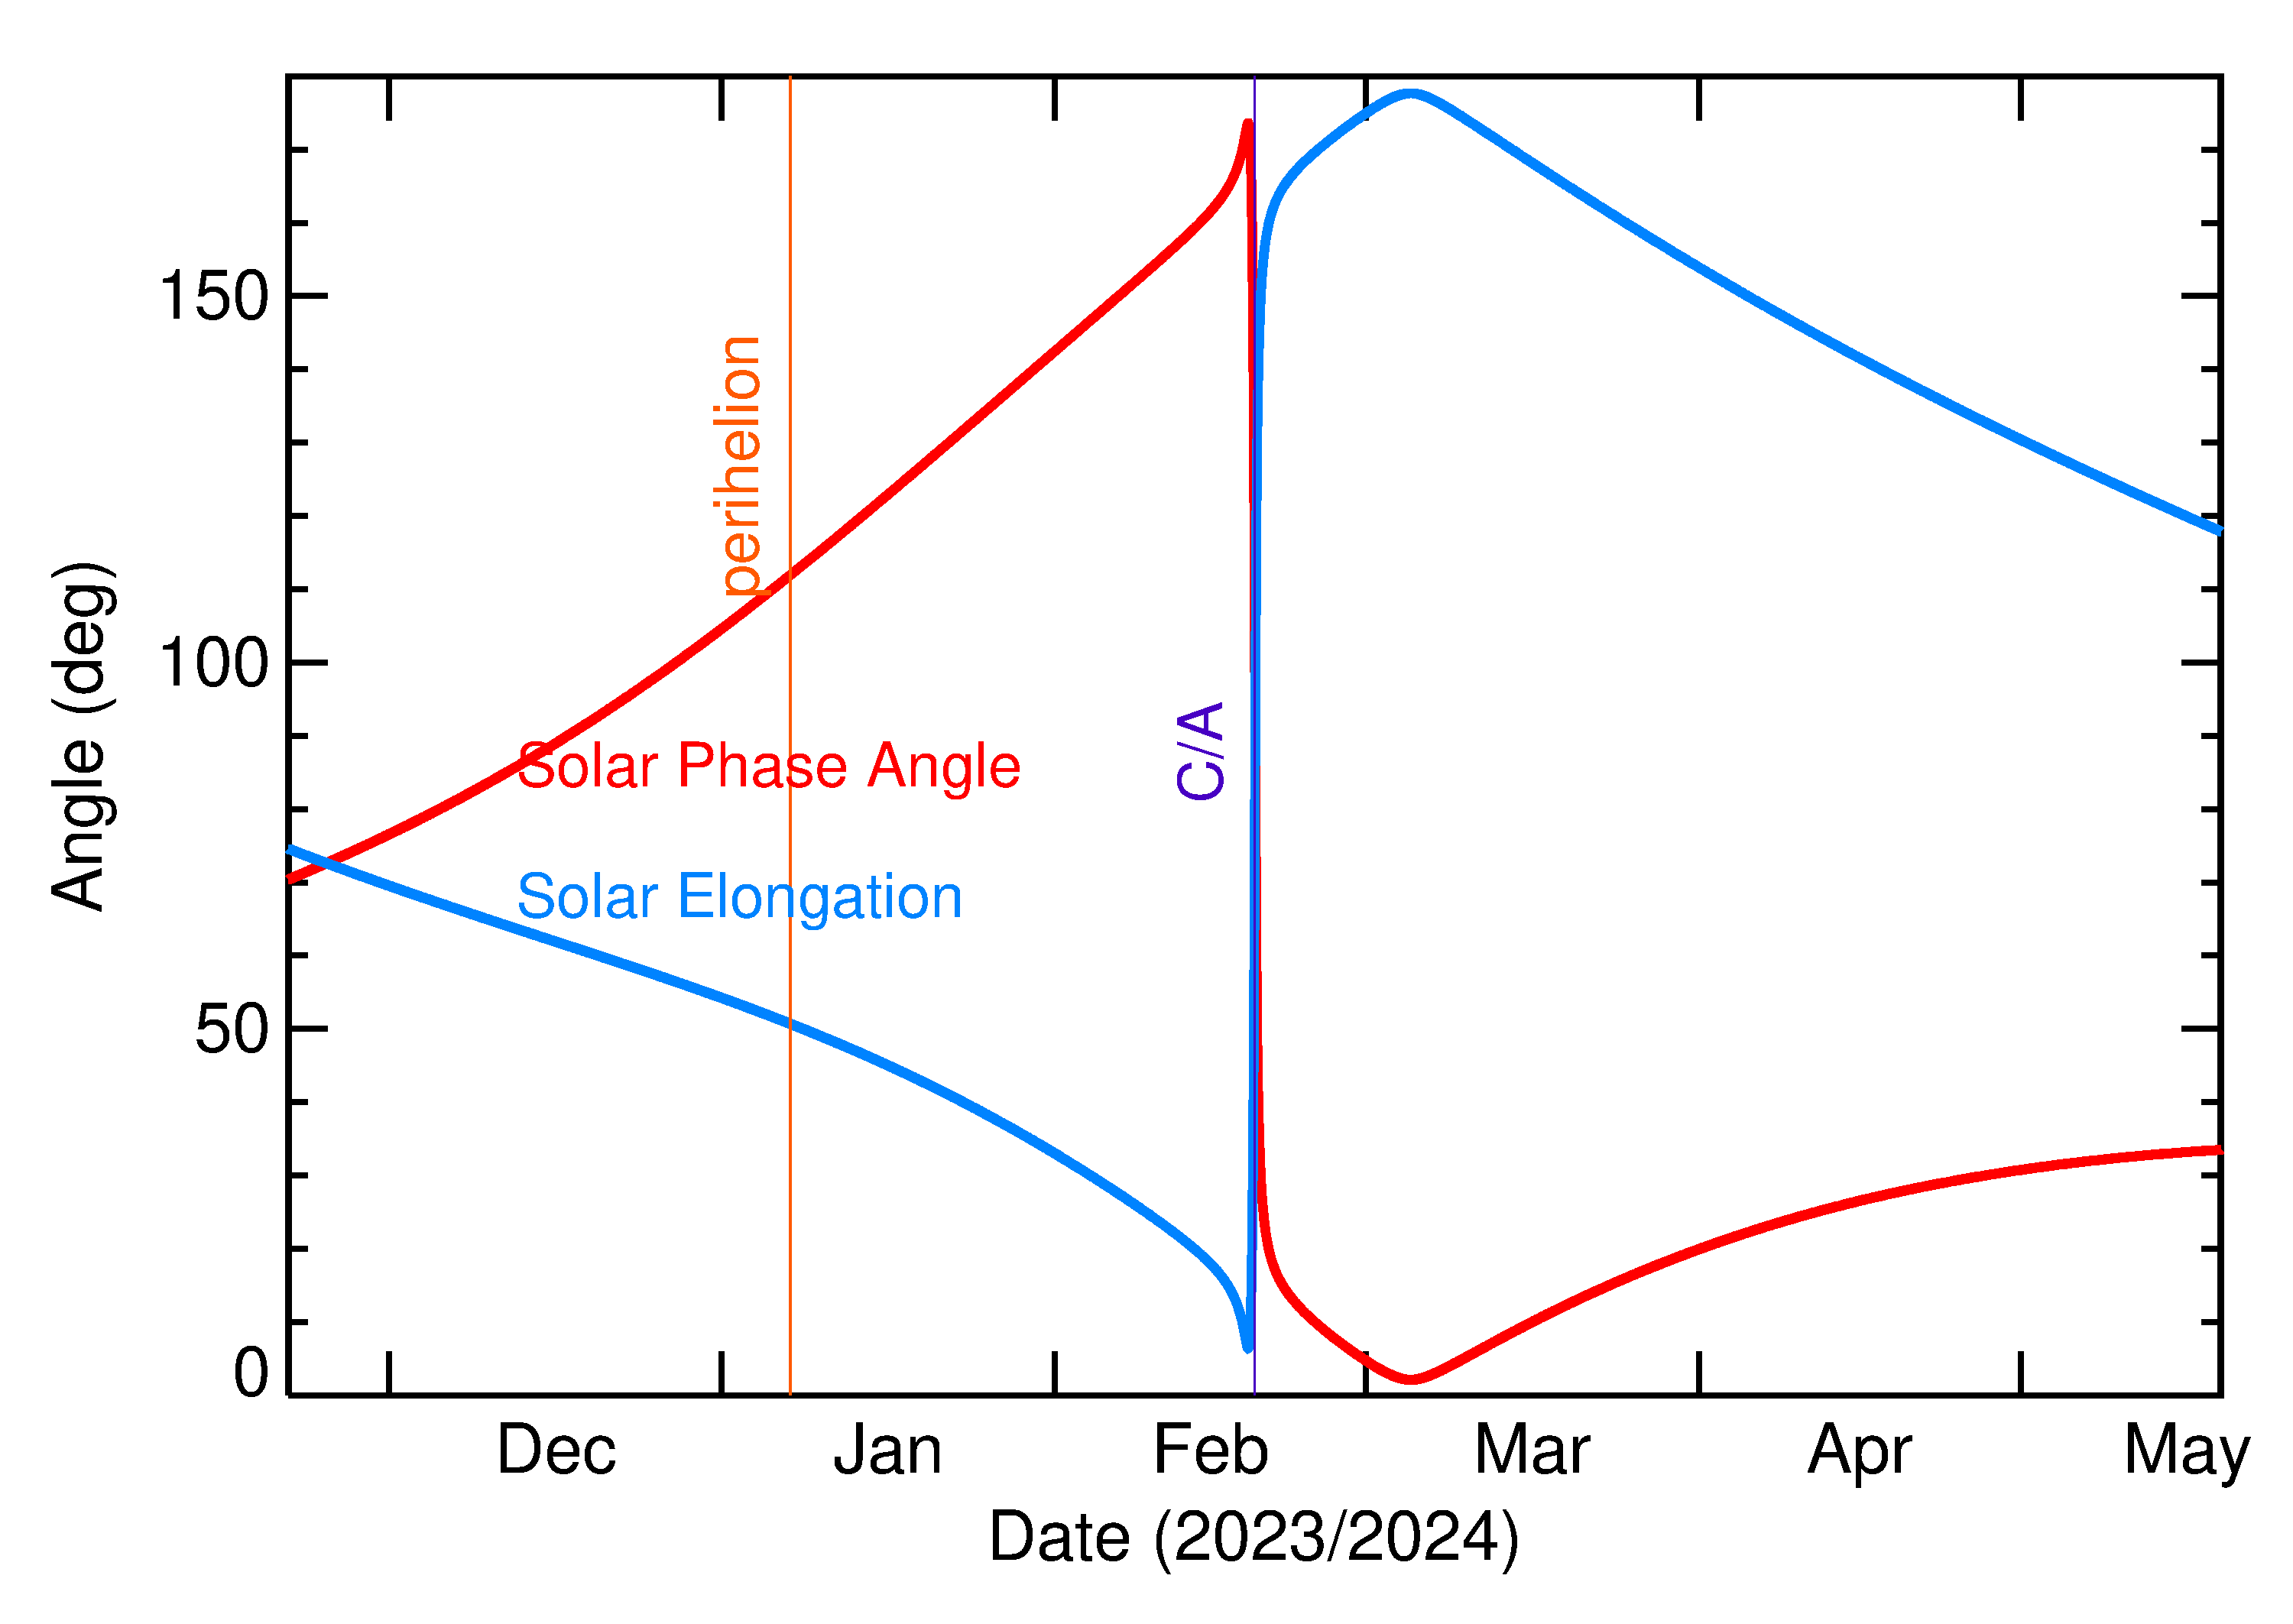 Solar Elongation and Solar Phase Angle of 2024 DY in the months around closest approach